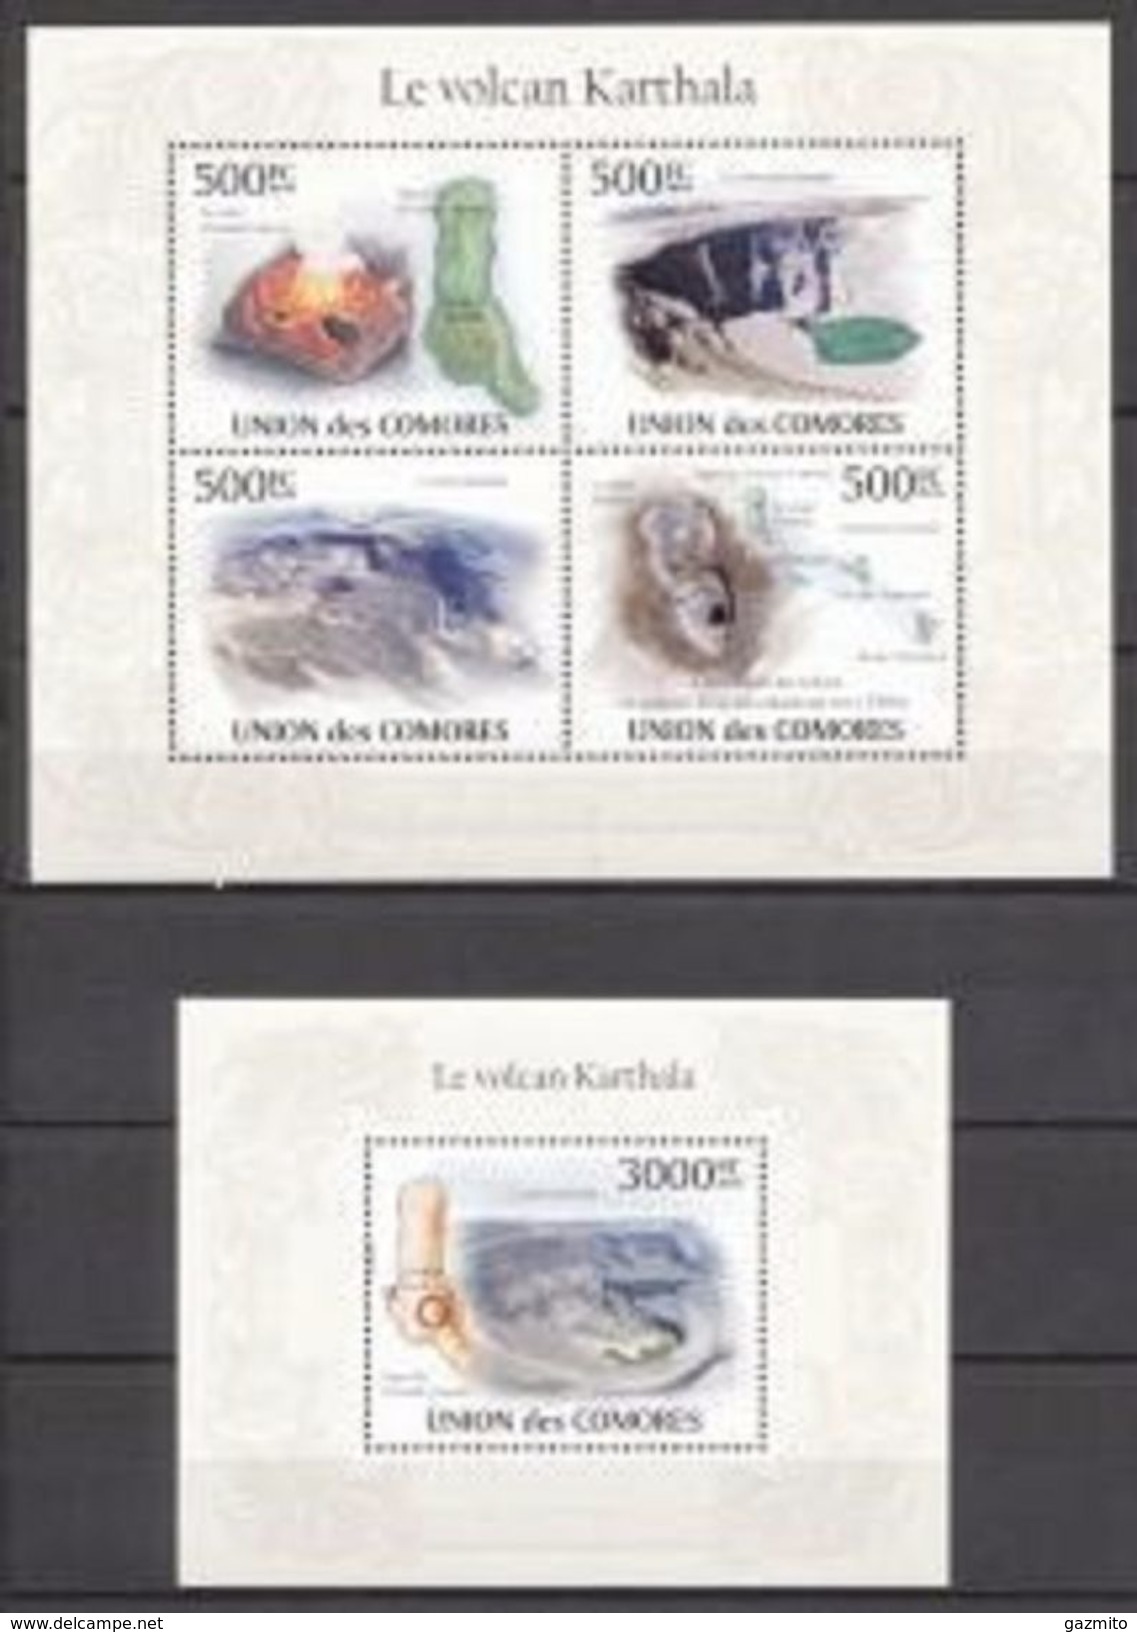 Comores 2010, Vulcan Kartkala, 4val In BF +BF IMPERFORATED - Volcanos